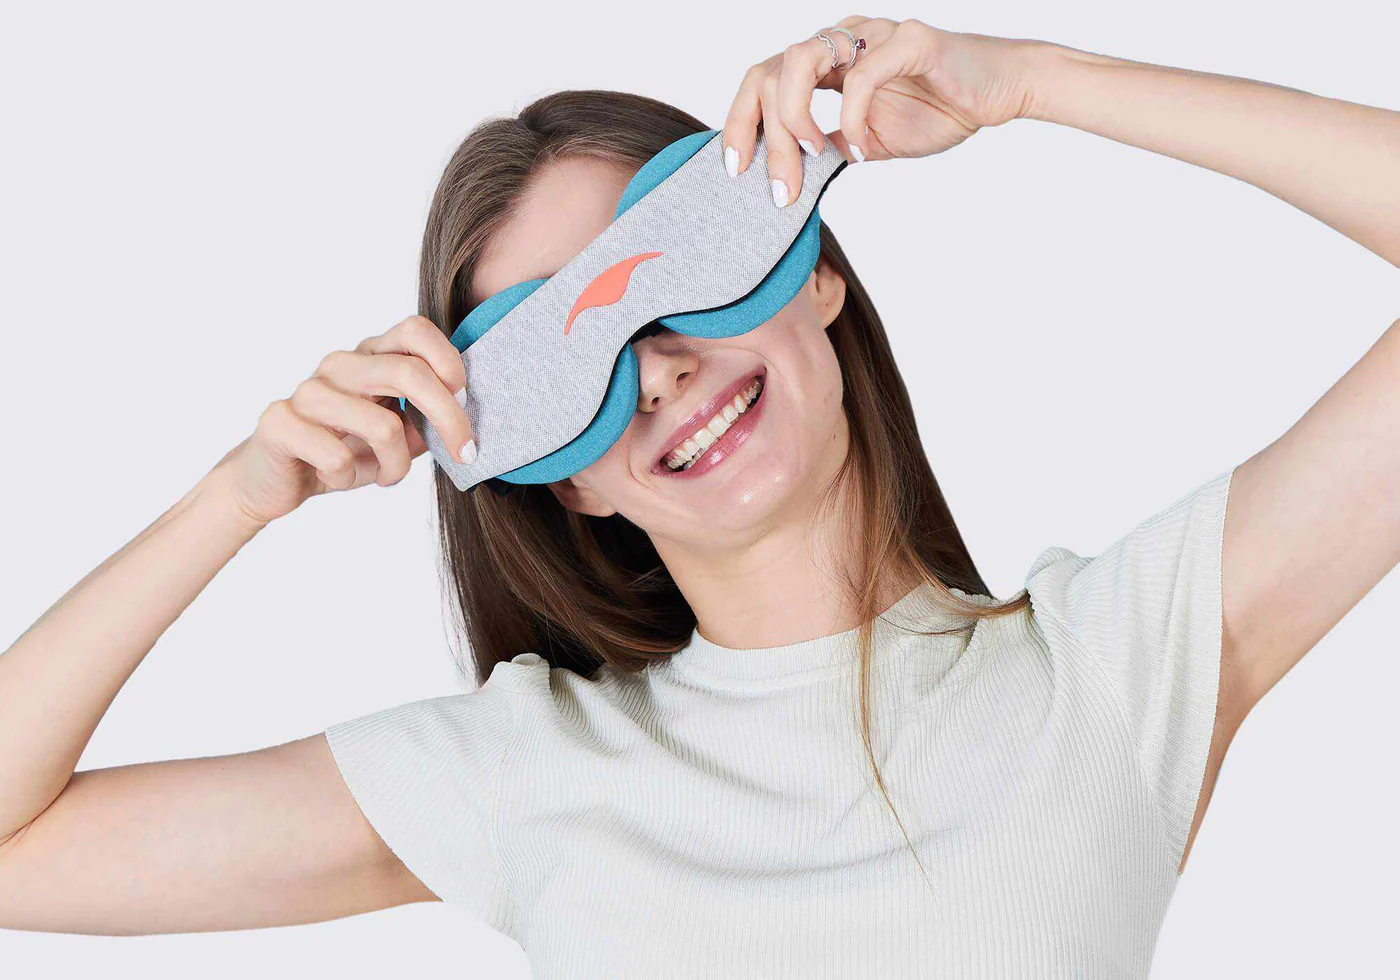 A smiling girl holding an eye mask with light blue cooling eye cups against her face.